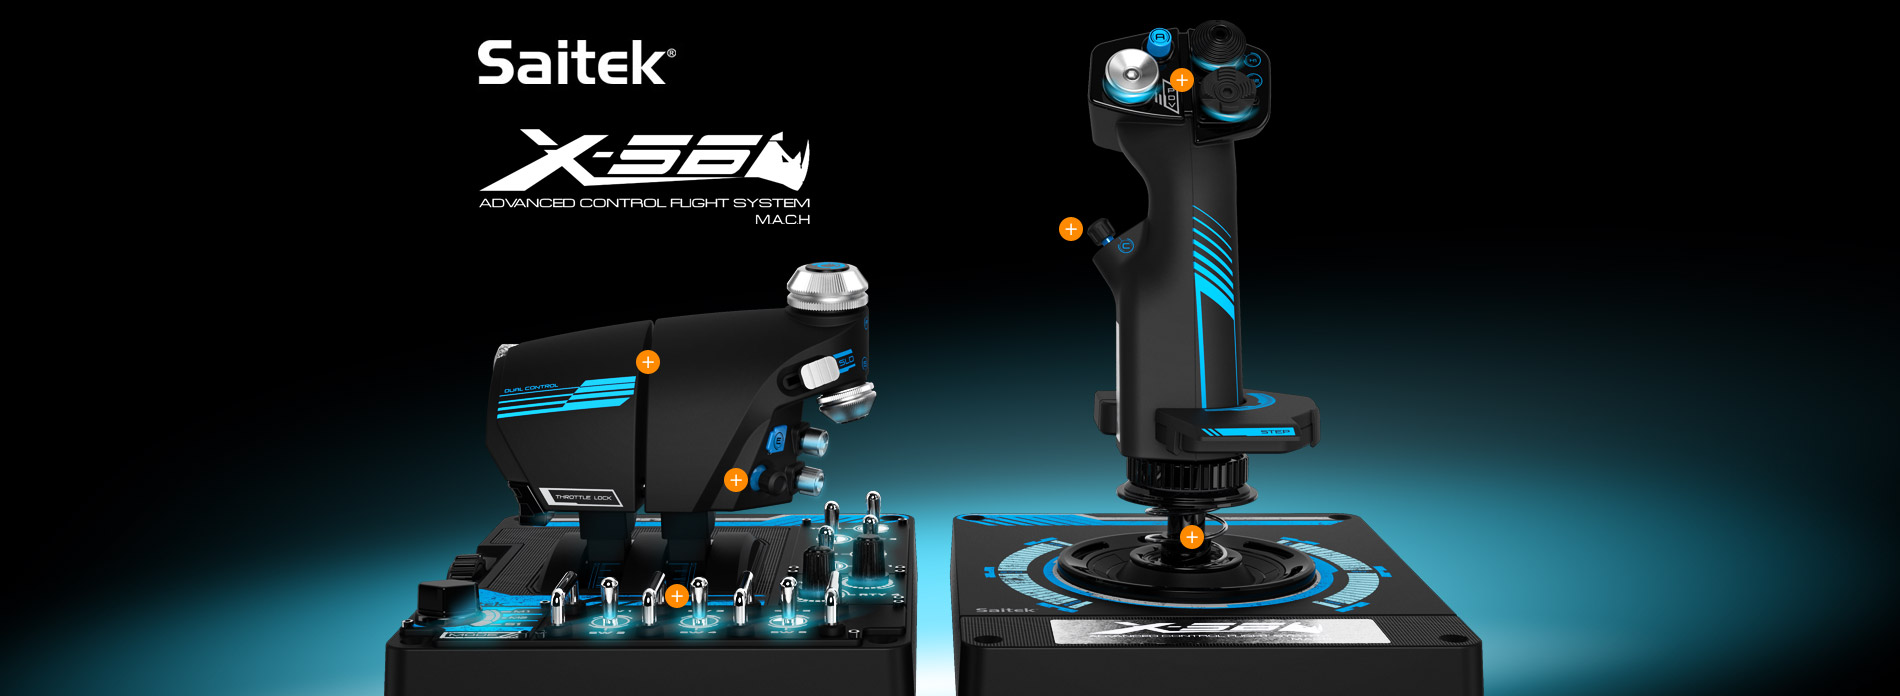 Grab feasible Bluebell Flight Simulator and Licensed Cessna Pro Flight Sim Products and the latest  X-56 | Saitek.com